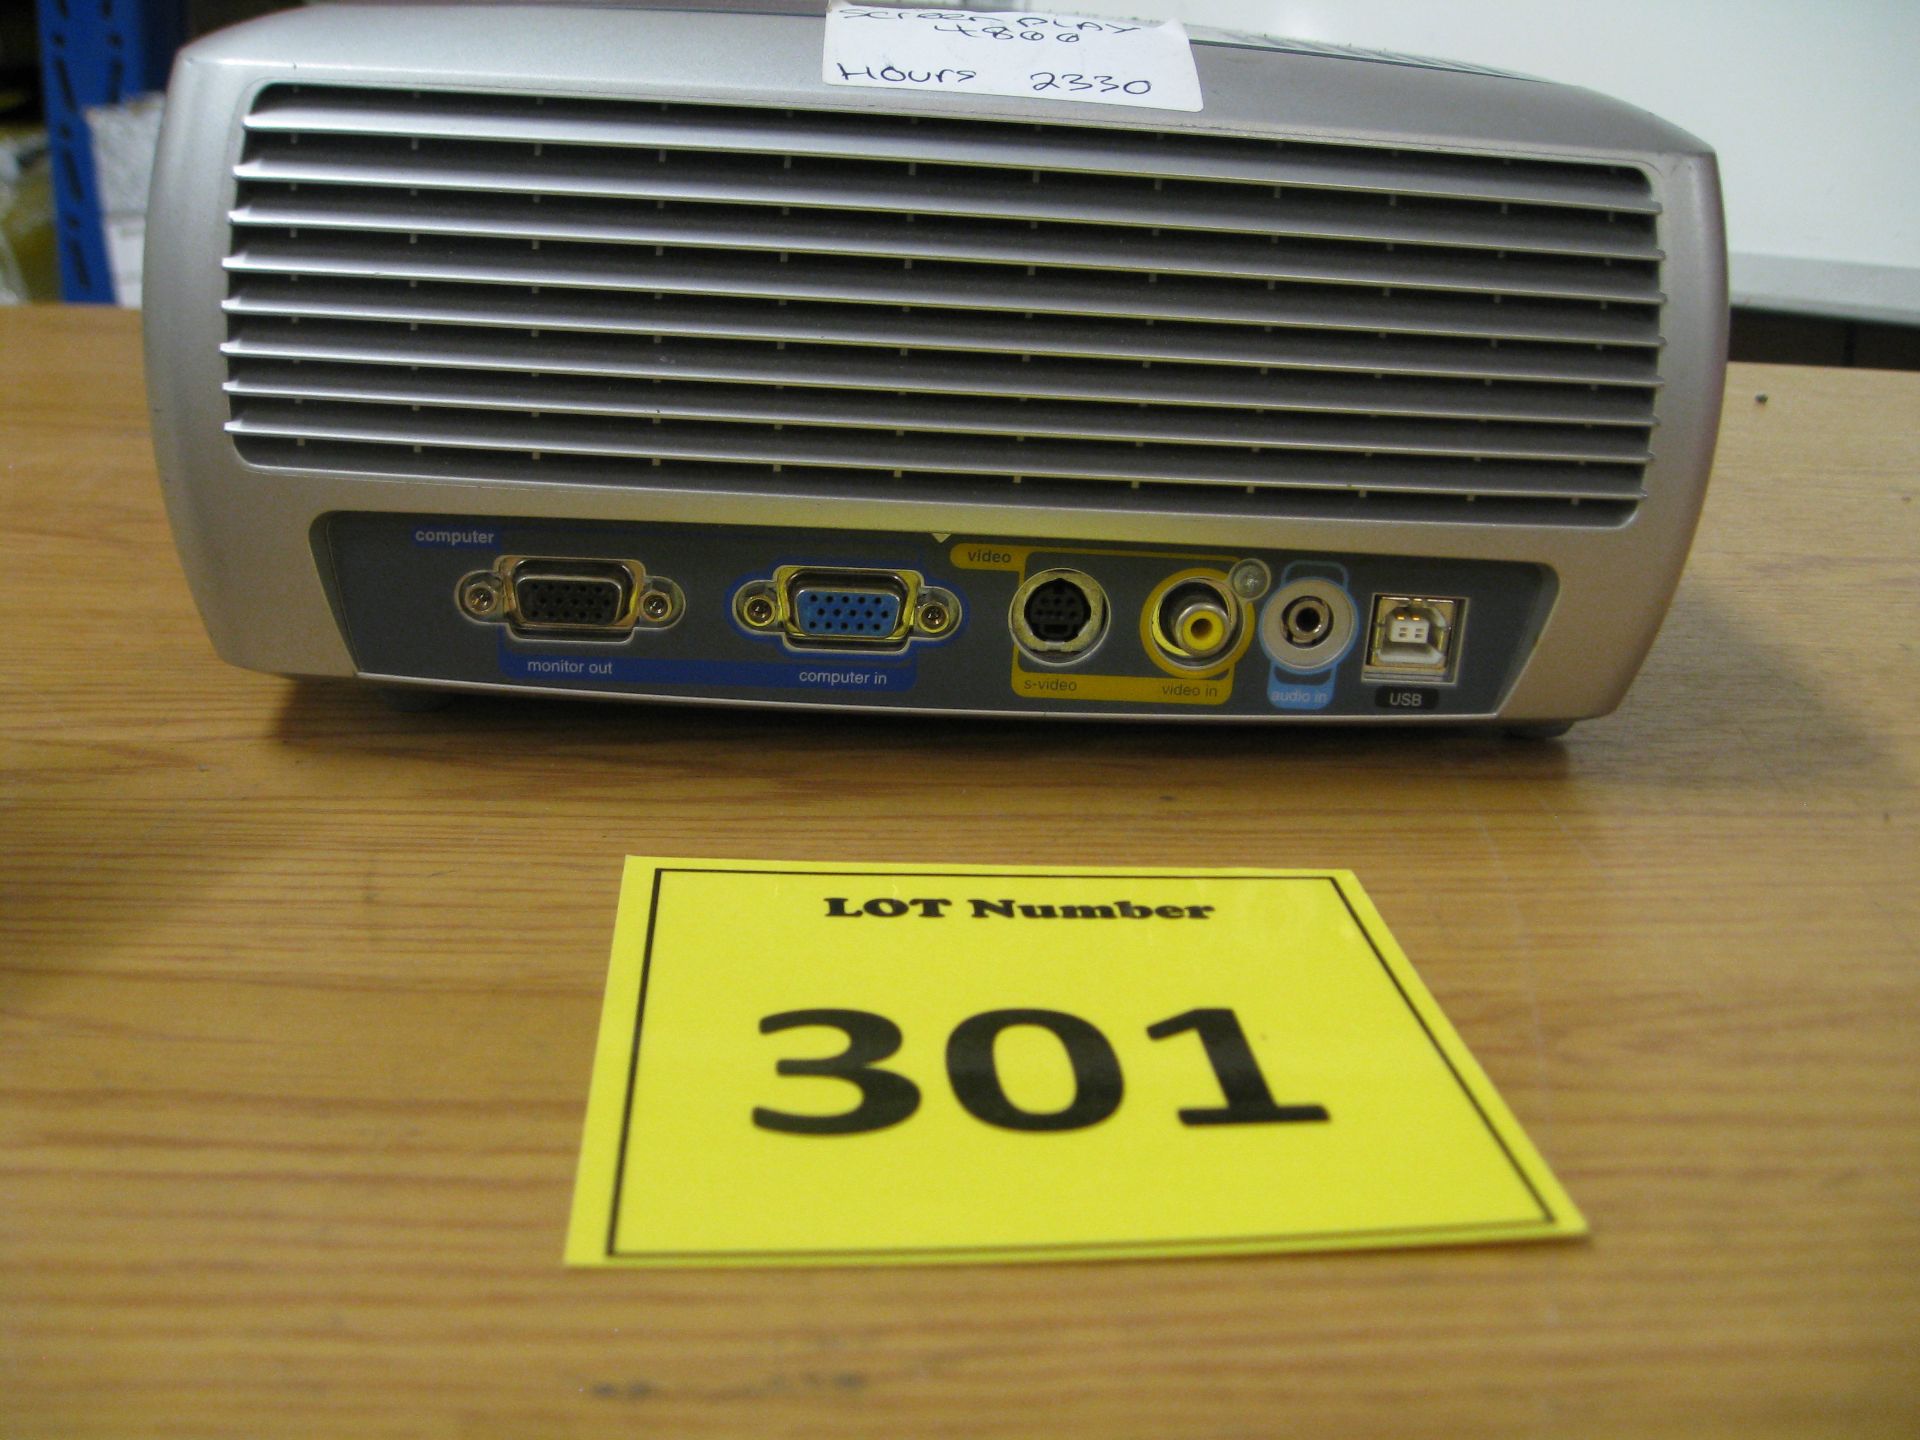 SCREENPLAY 4800 PROJECTOR. SHOWING 2330 HOURS - Image 3 of 3